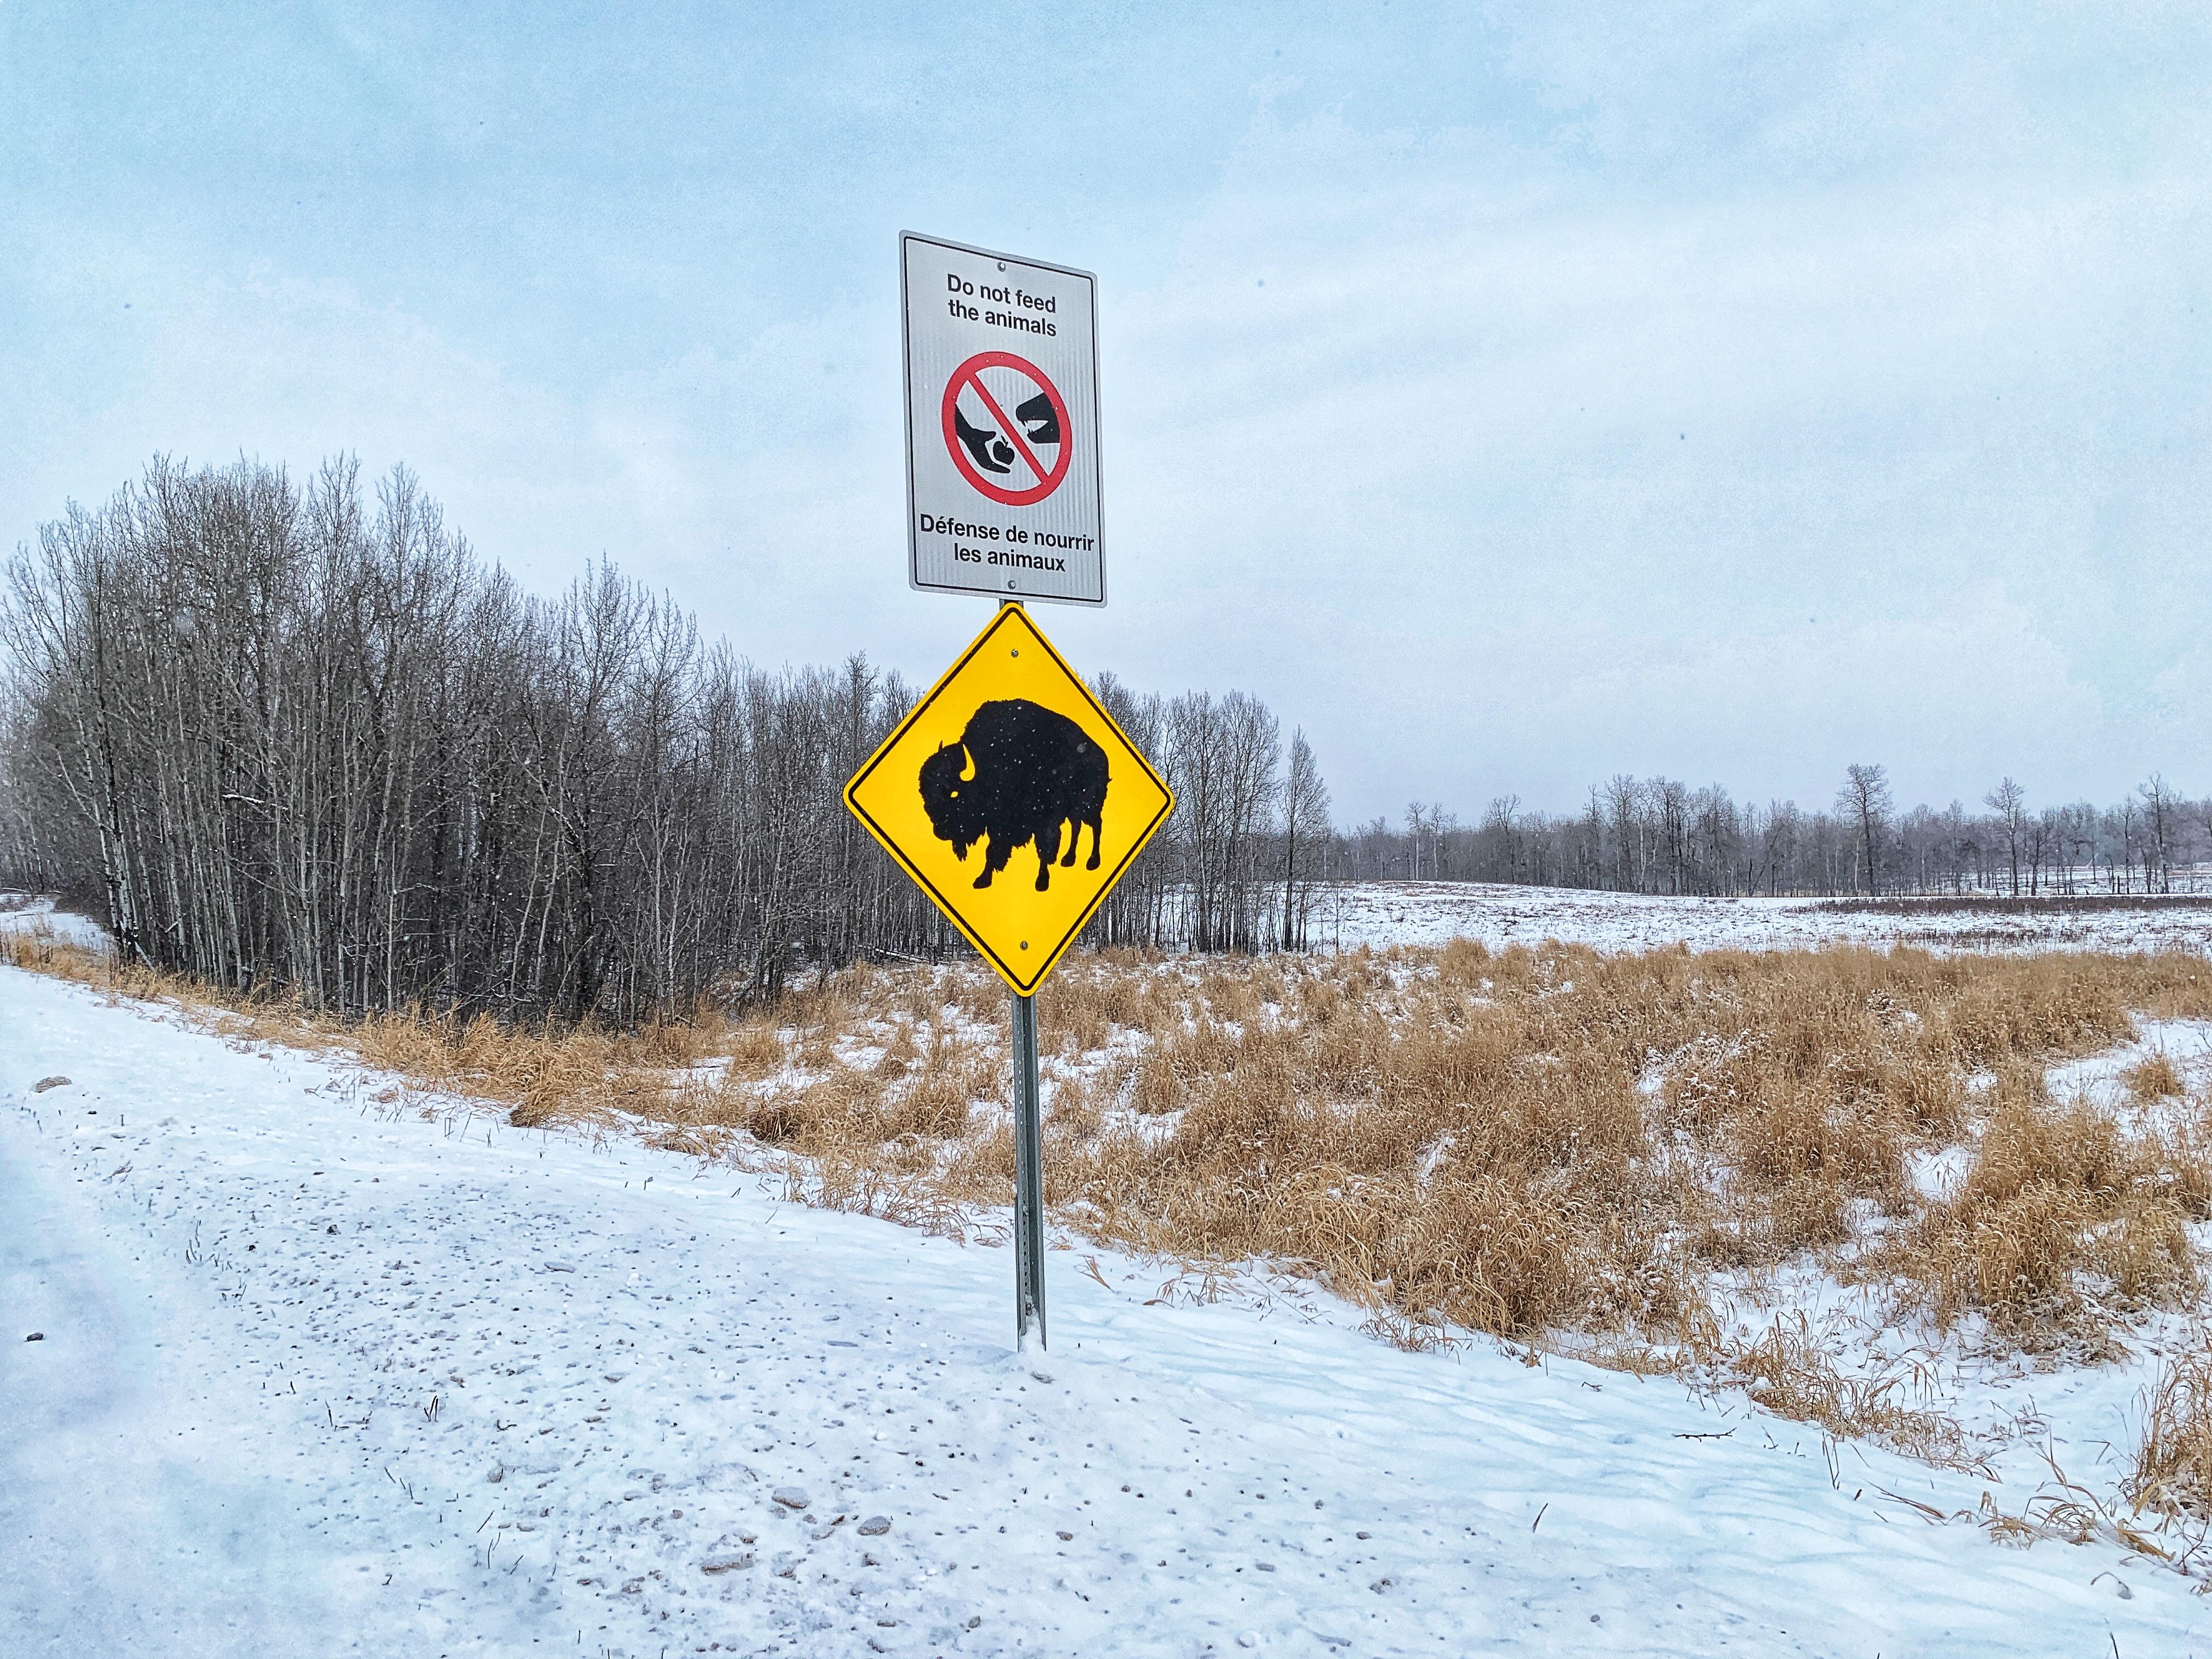 Elk Island National Park, home to bison, is the only fully fenced national park in Canada.